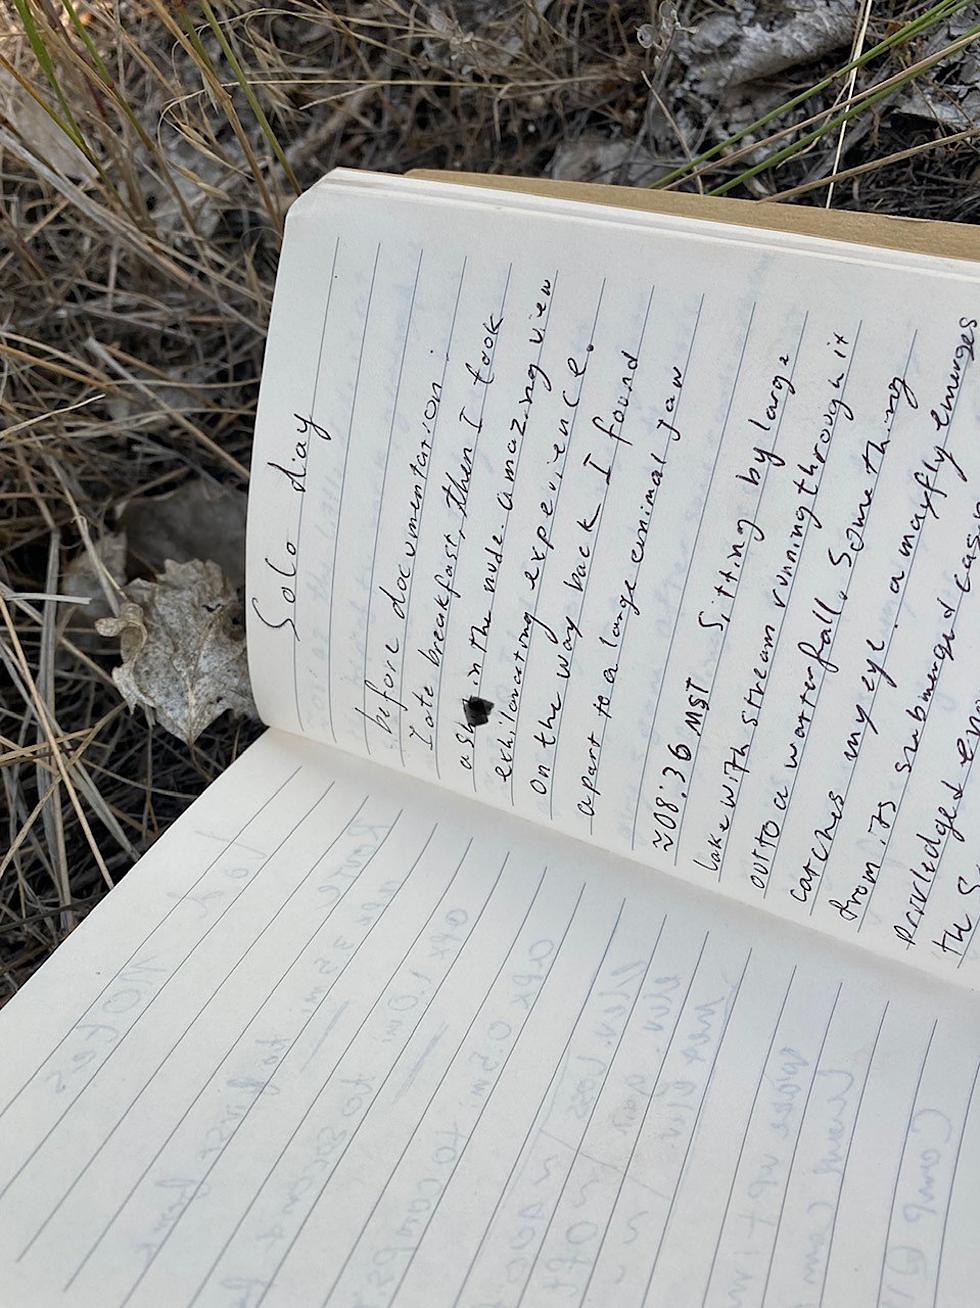 FOUND: Eccentric Journal Lost Deep In The Wyoming Wilderness is Intriguing